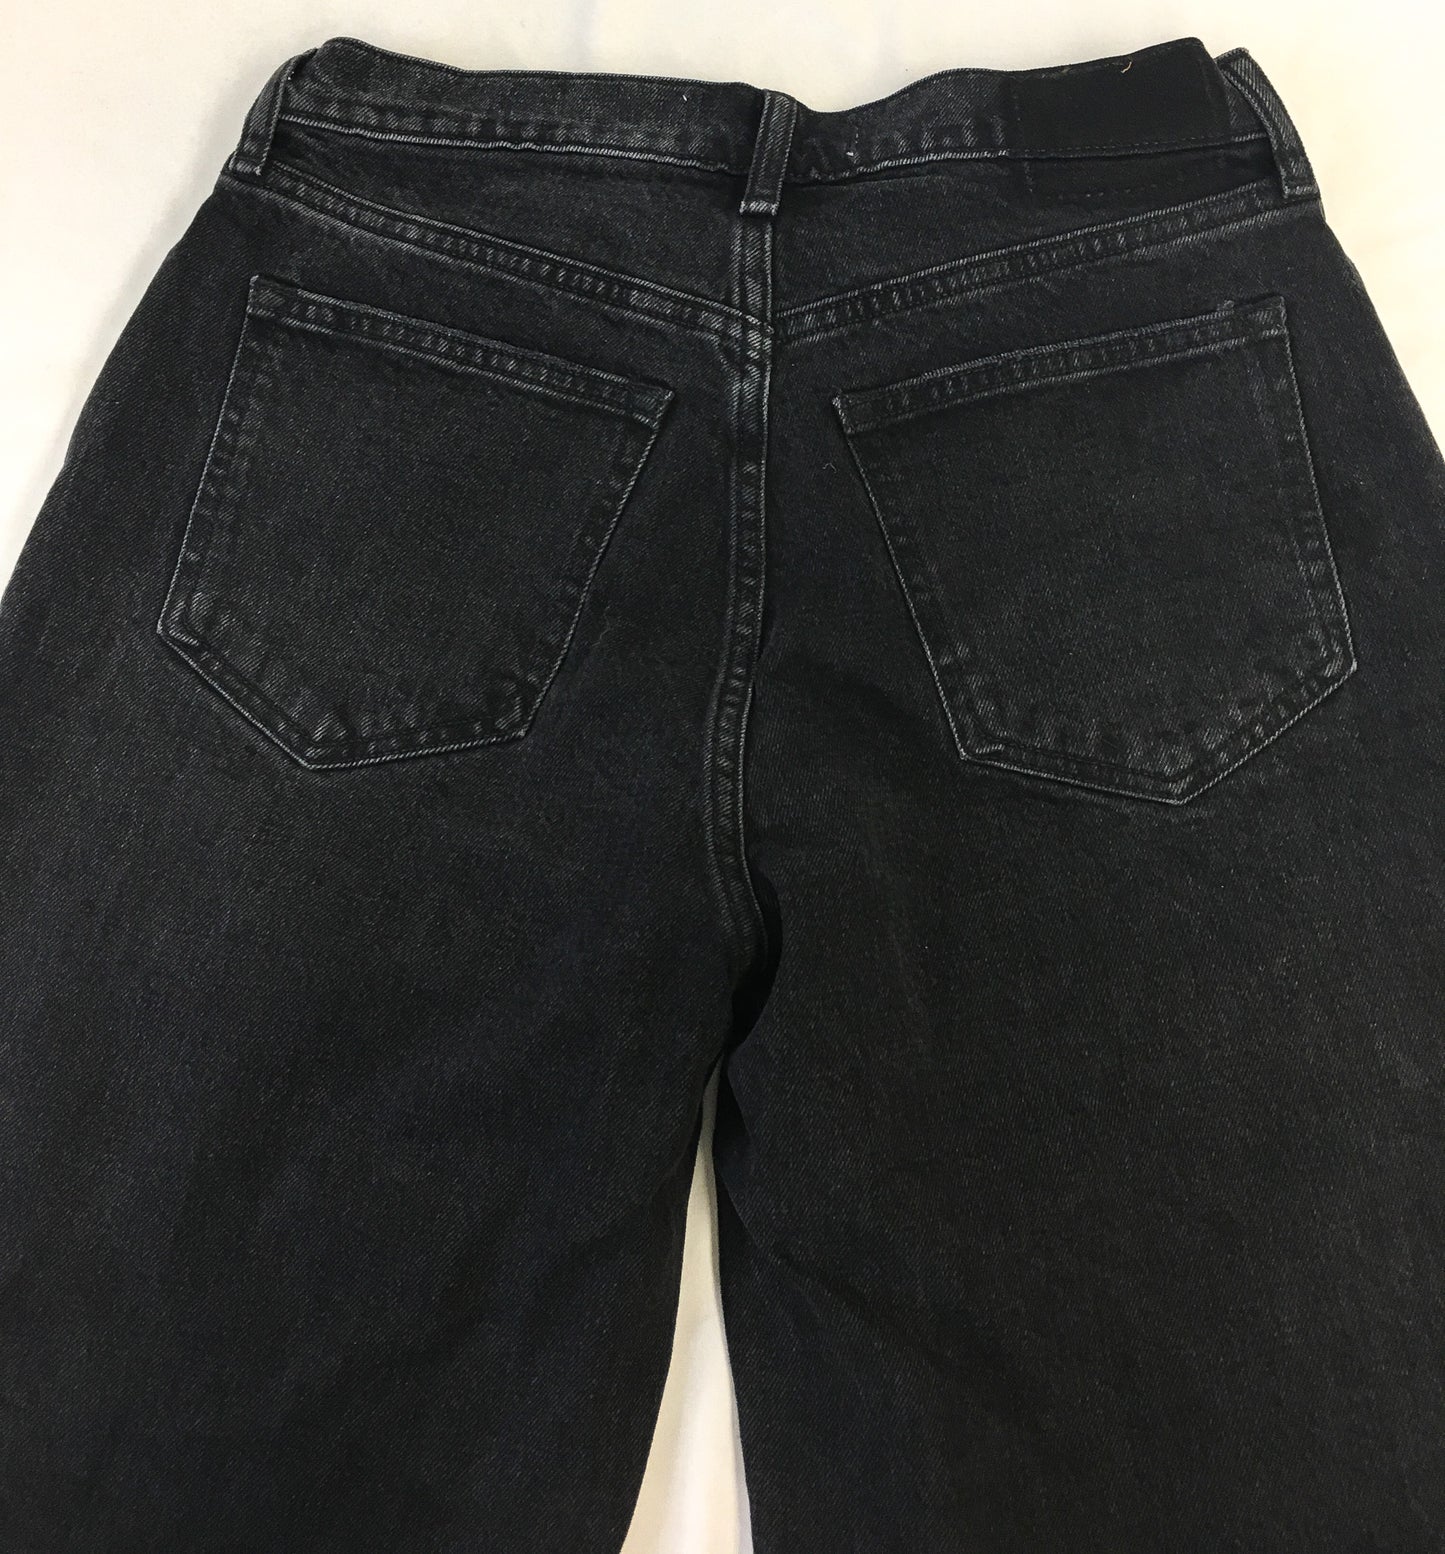 NWT Abercrombie and Fitch 80's Black Mom Jeans, Sz. 8, 29L